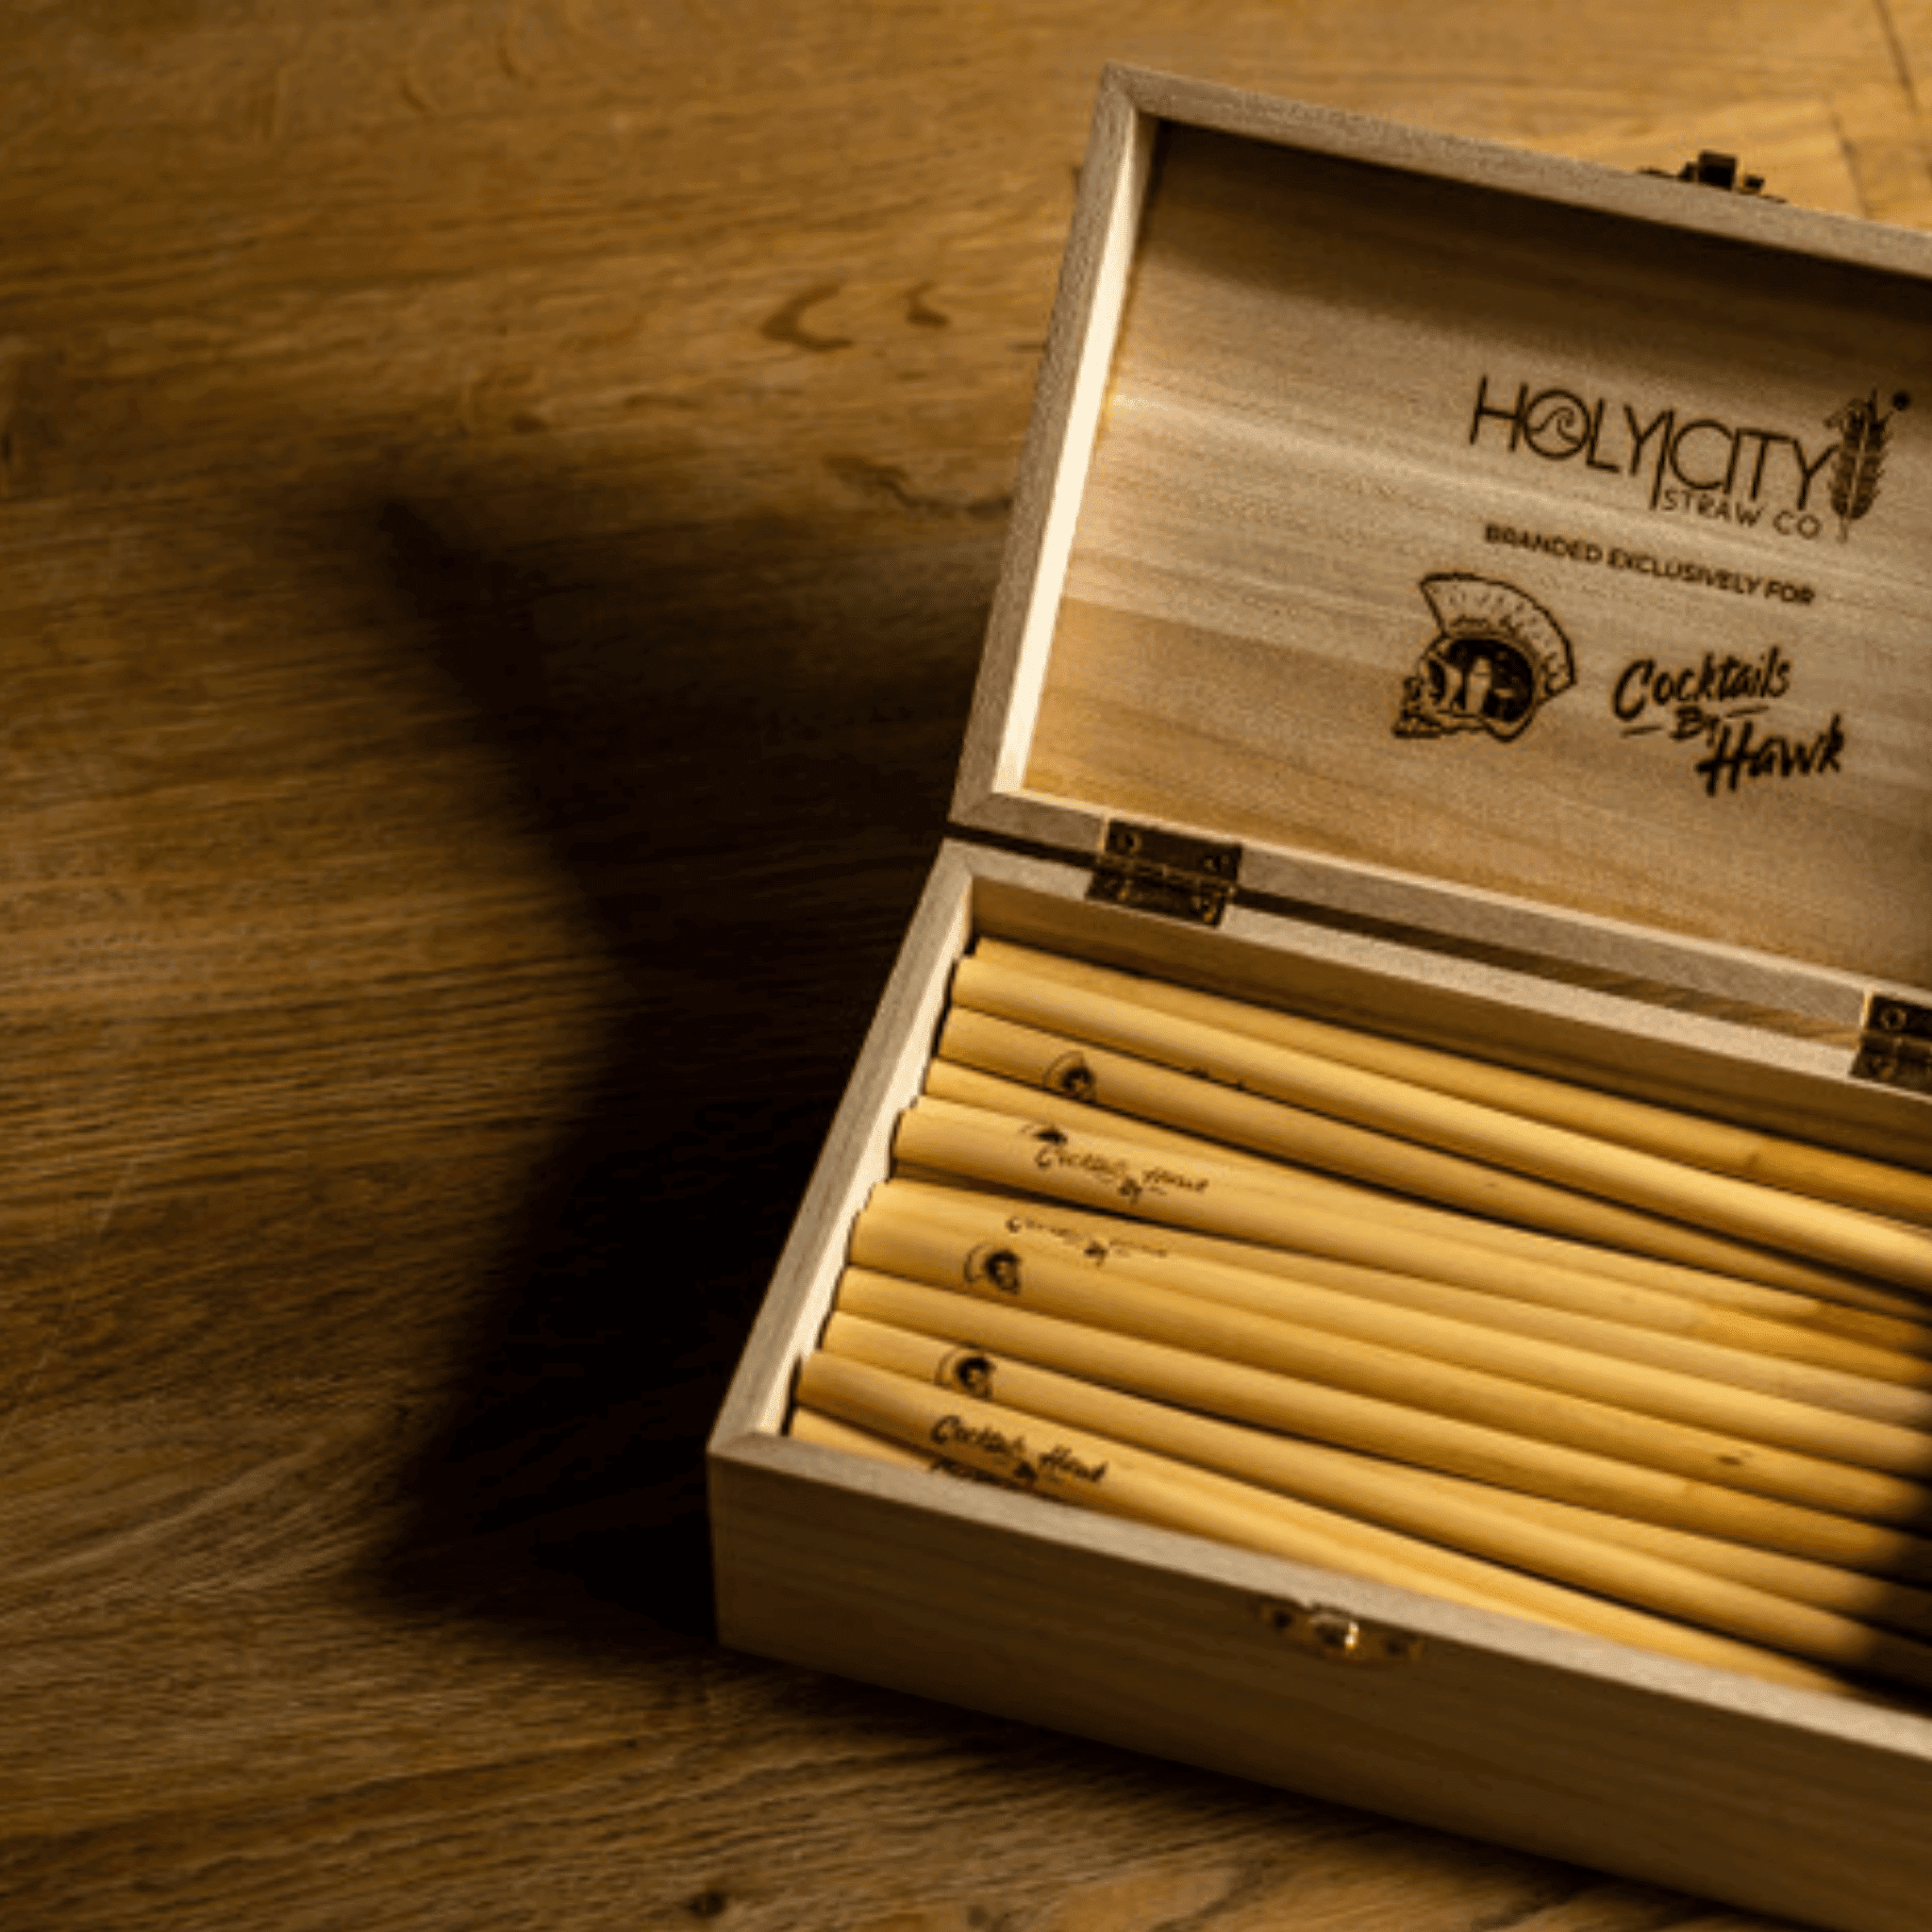 Cocktails by Hawk Branded box and straws made by Holy City Straw Company.png